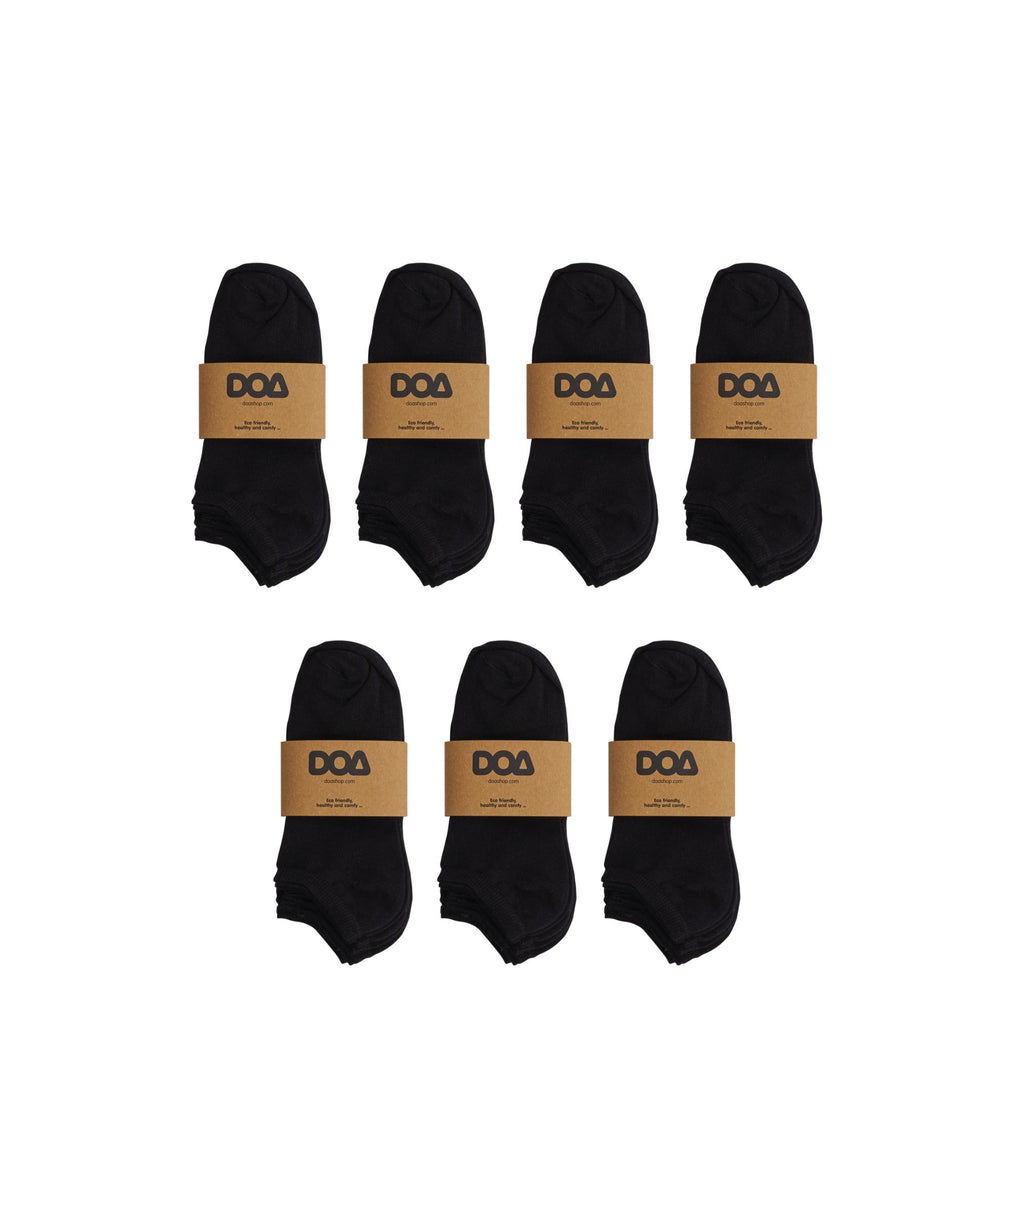 doa 7-Pair Super Soft Bamboo No Show Ankle Socks for Women